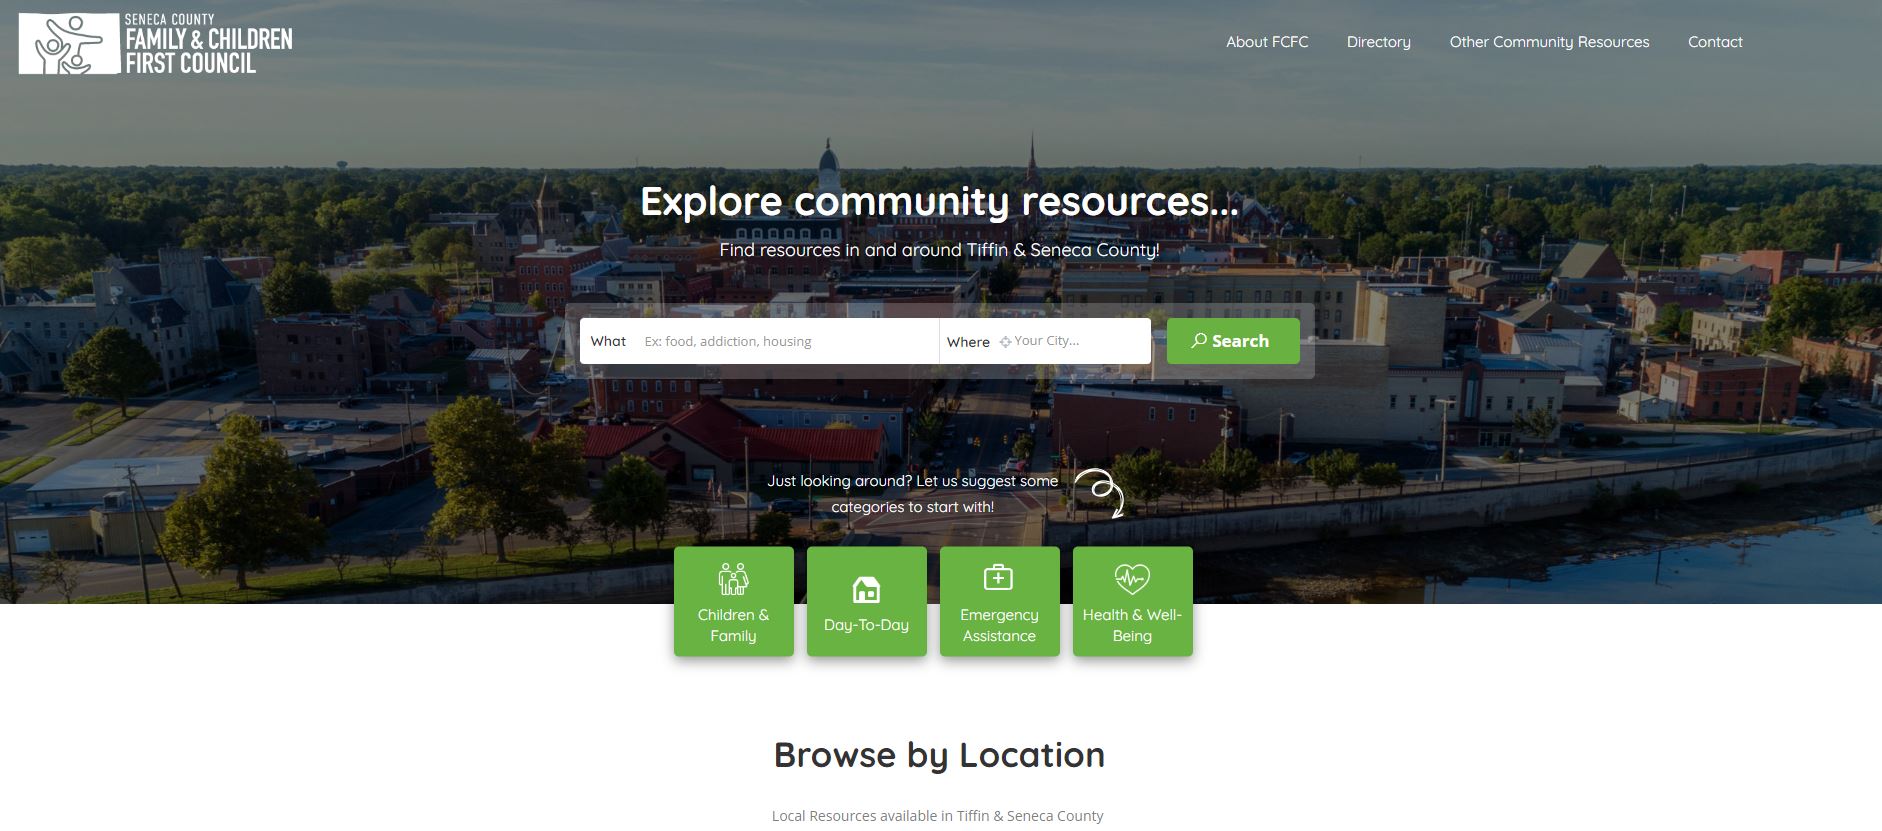 New website for Seneca County Family & Children First Council